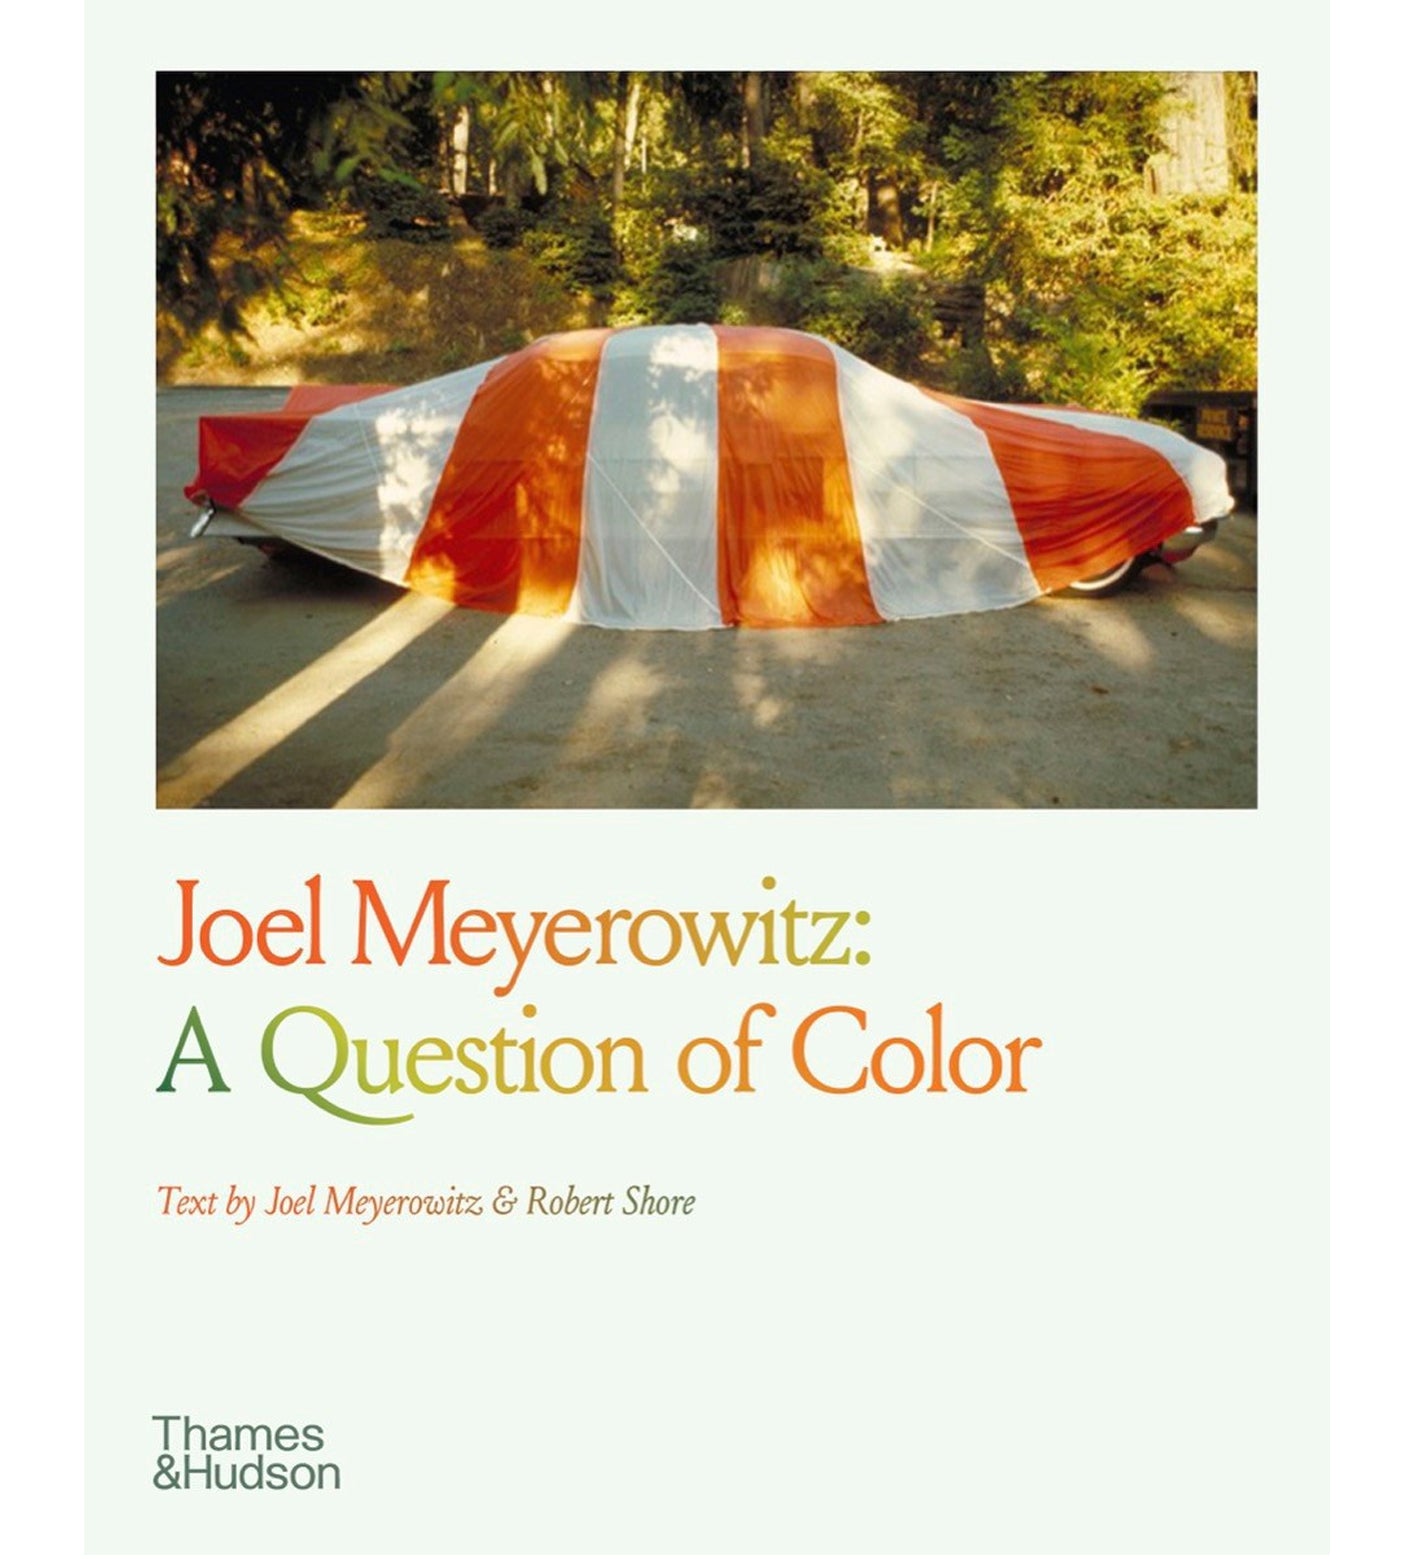 Joel Meyerowitz: A Question of Colour (preorder signed copies)